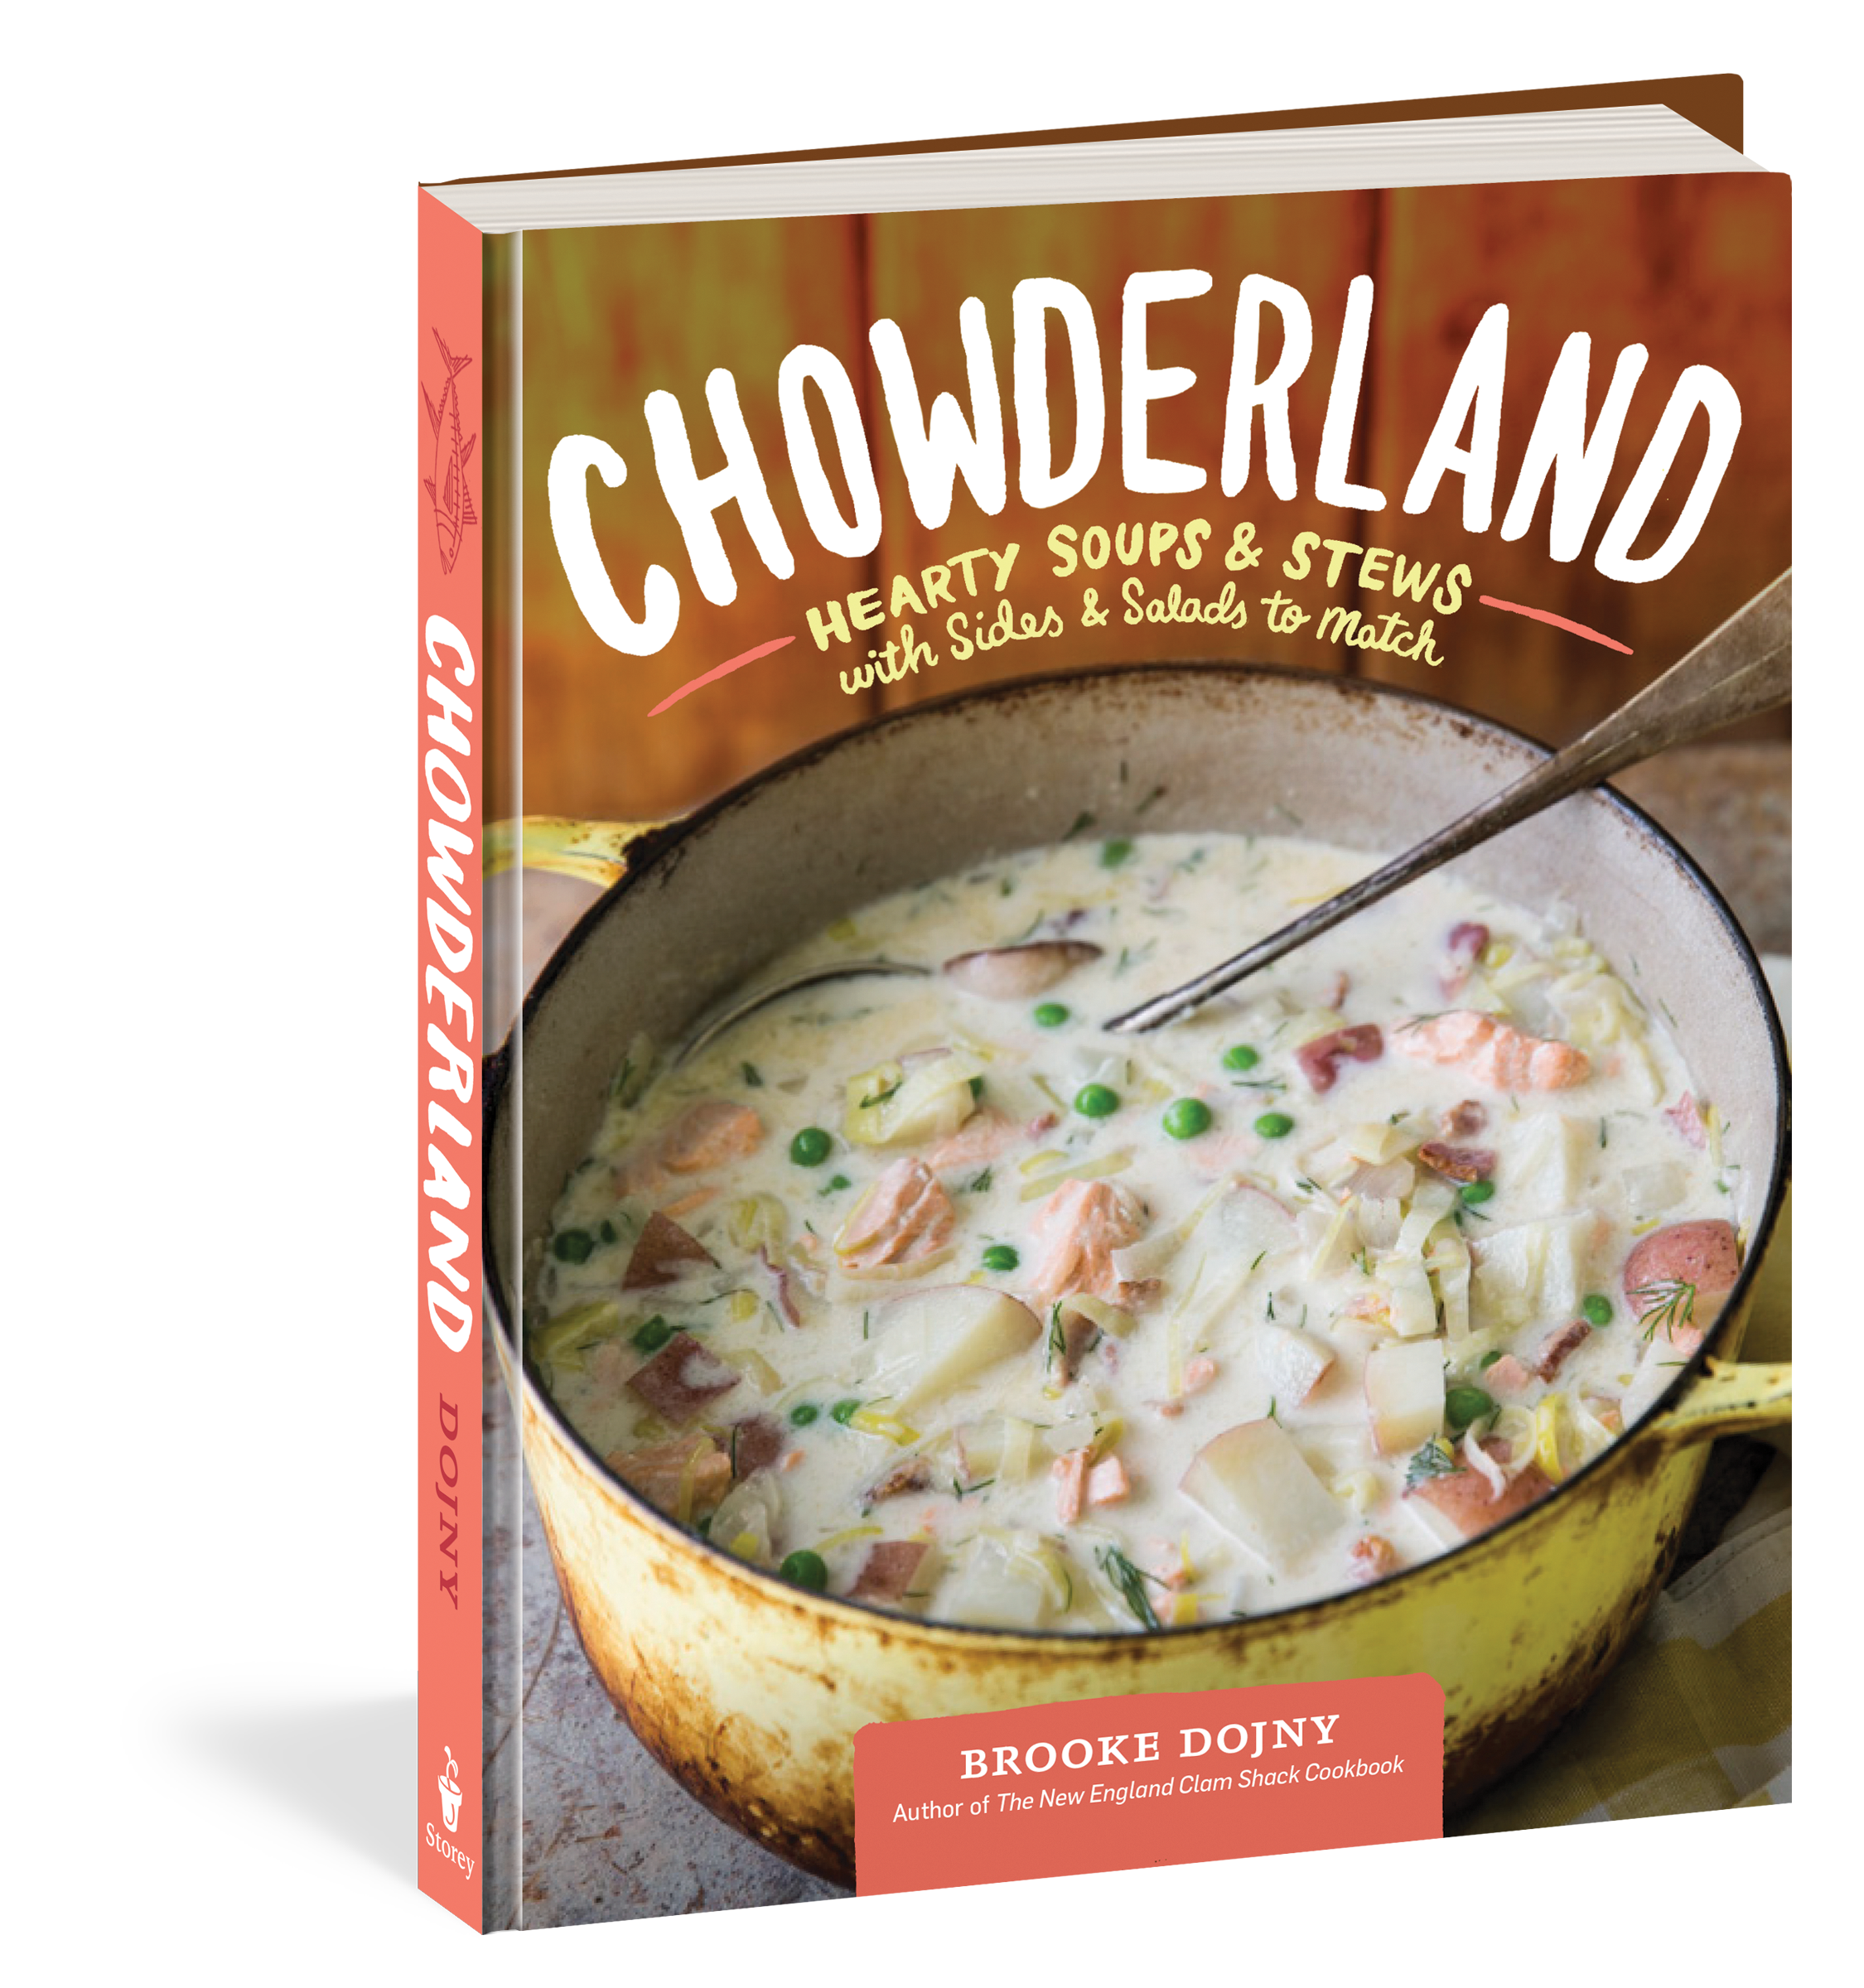 Chowderland - Hearty Soups & Stews    